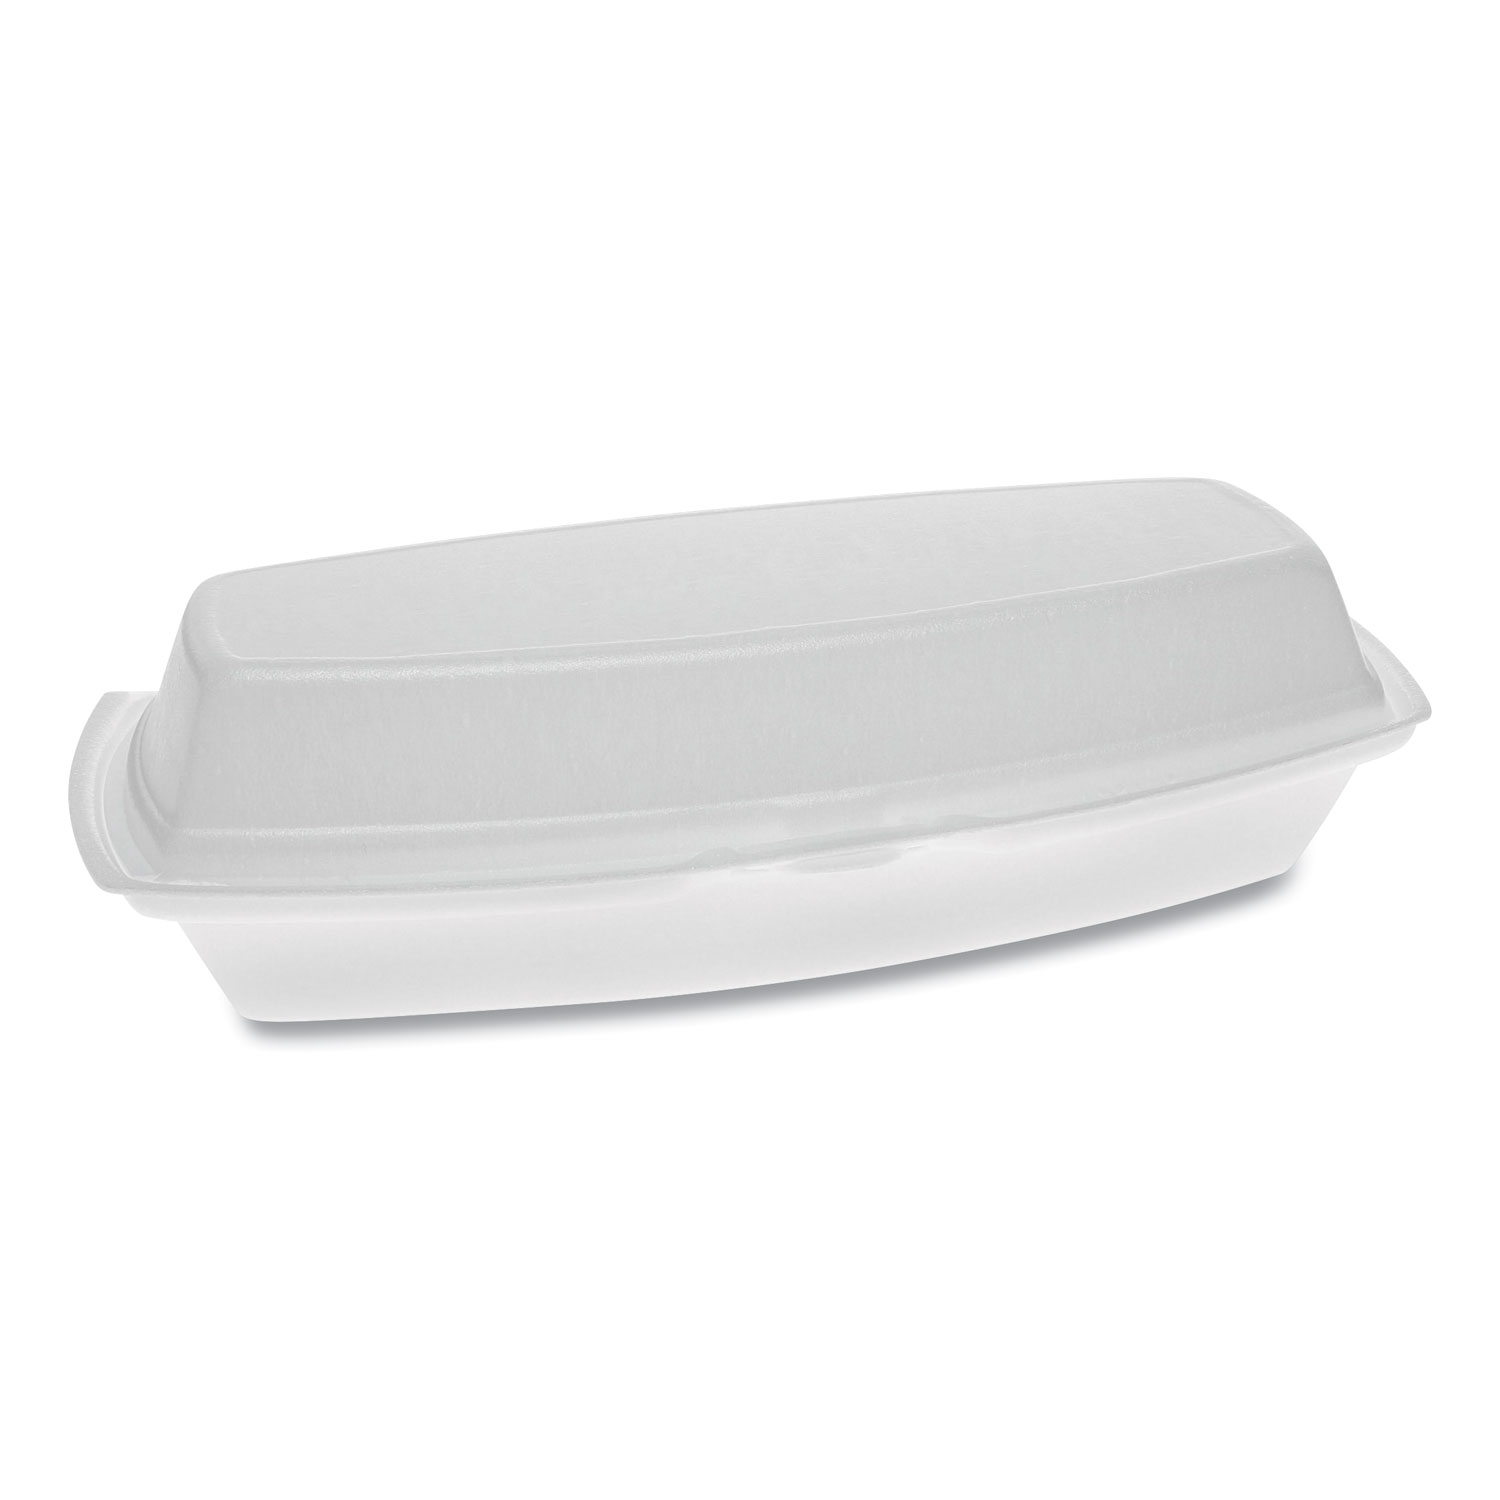 Pactiv Foam Hinged Lid Containers, Single Tab Lock Hot Dog, 7.25 x 3 x 2, 1-Compartment, White, 504/Carton